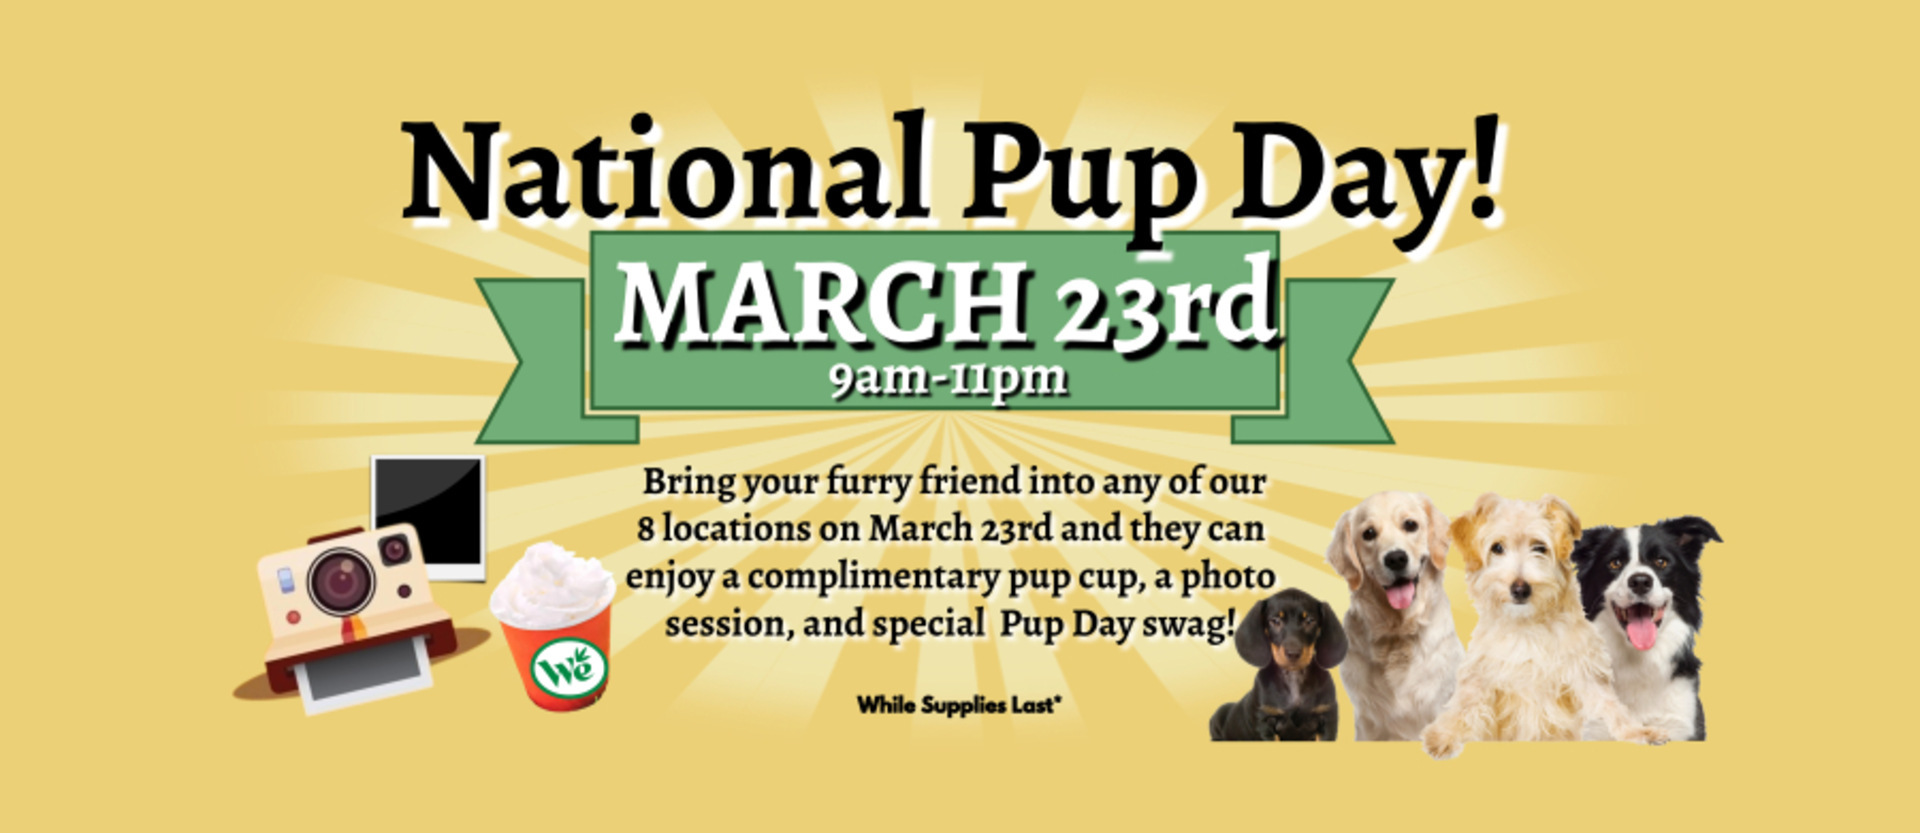 National Pup Day - March 23